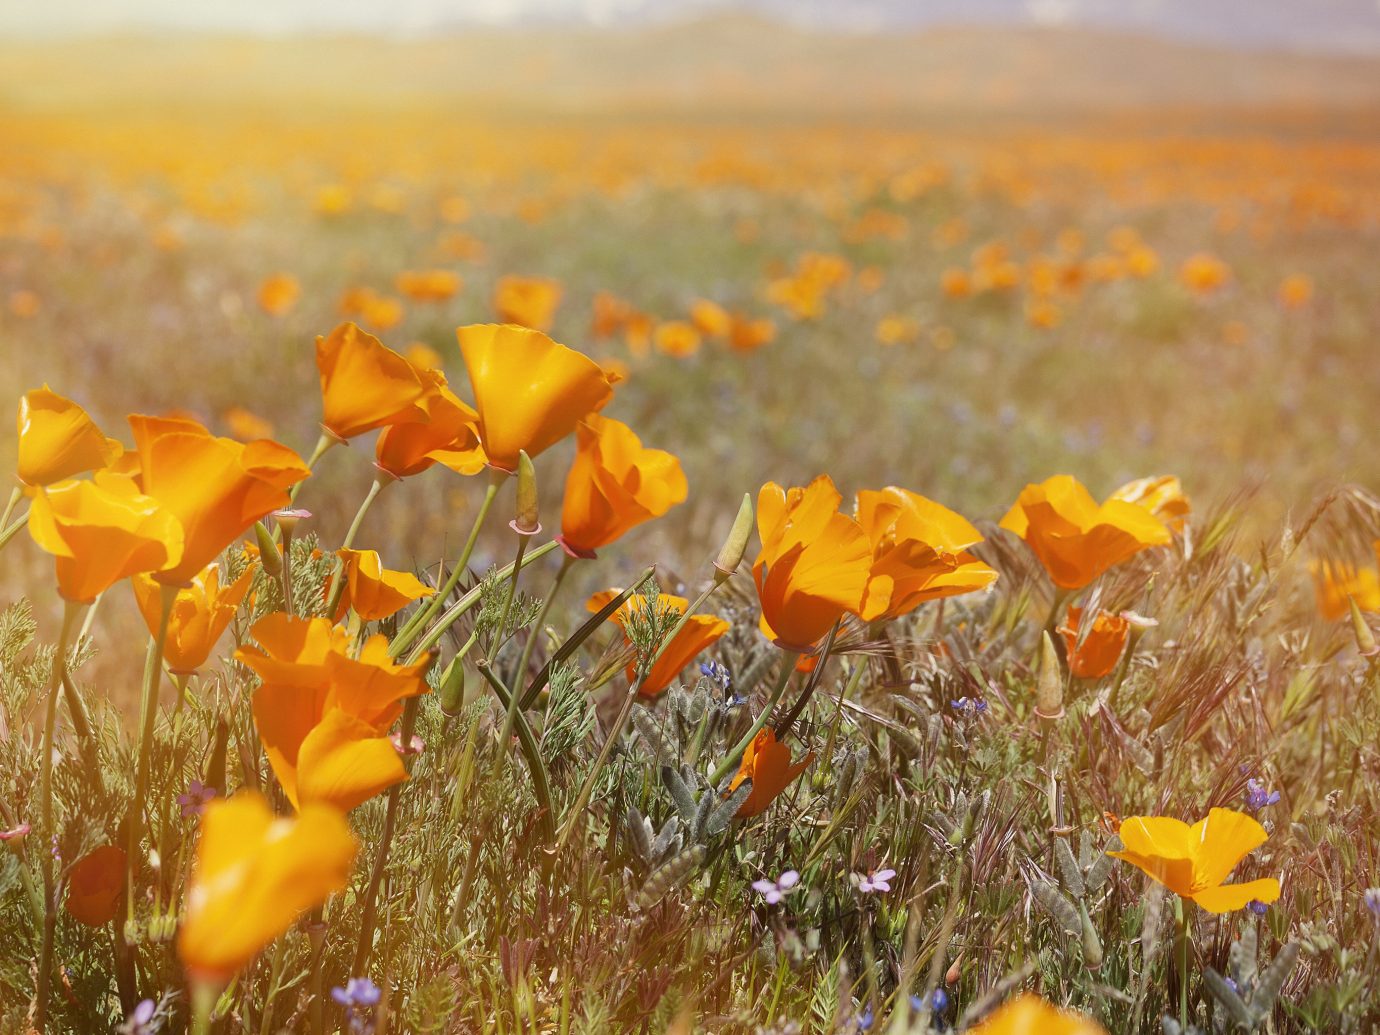 Trip Ideas flower grass Nature poppy plant eschscholzia californica flora natural environment ecosystem yellow grassland poppy family prairie meadow field land plant wildflower flowering plant petal leaf tundra coquelicot plain autumn grass family sunlight steppe colored